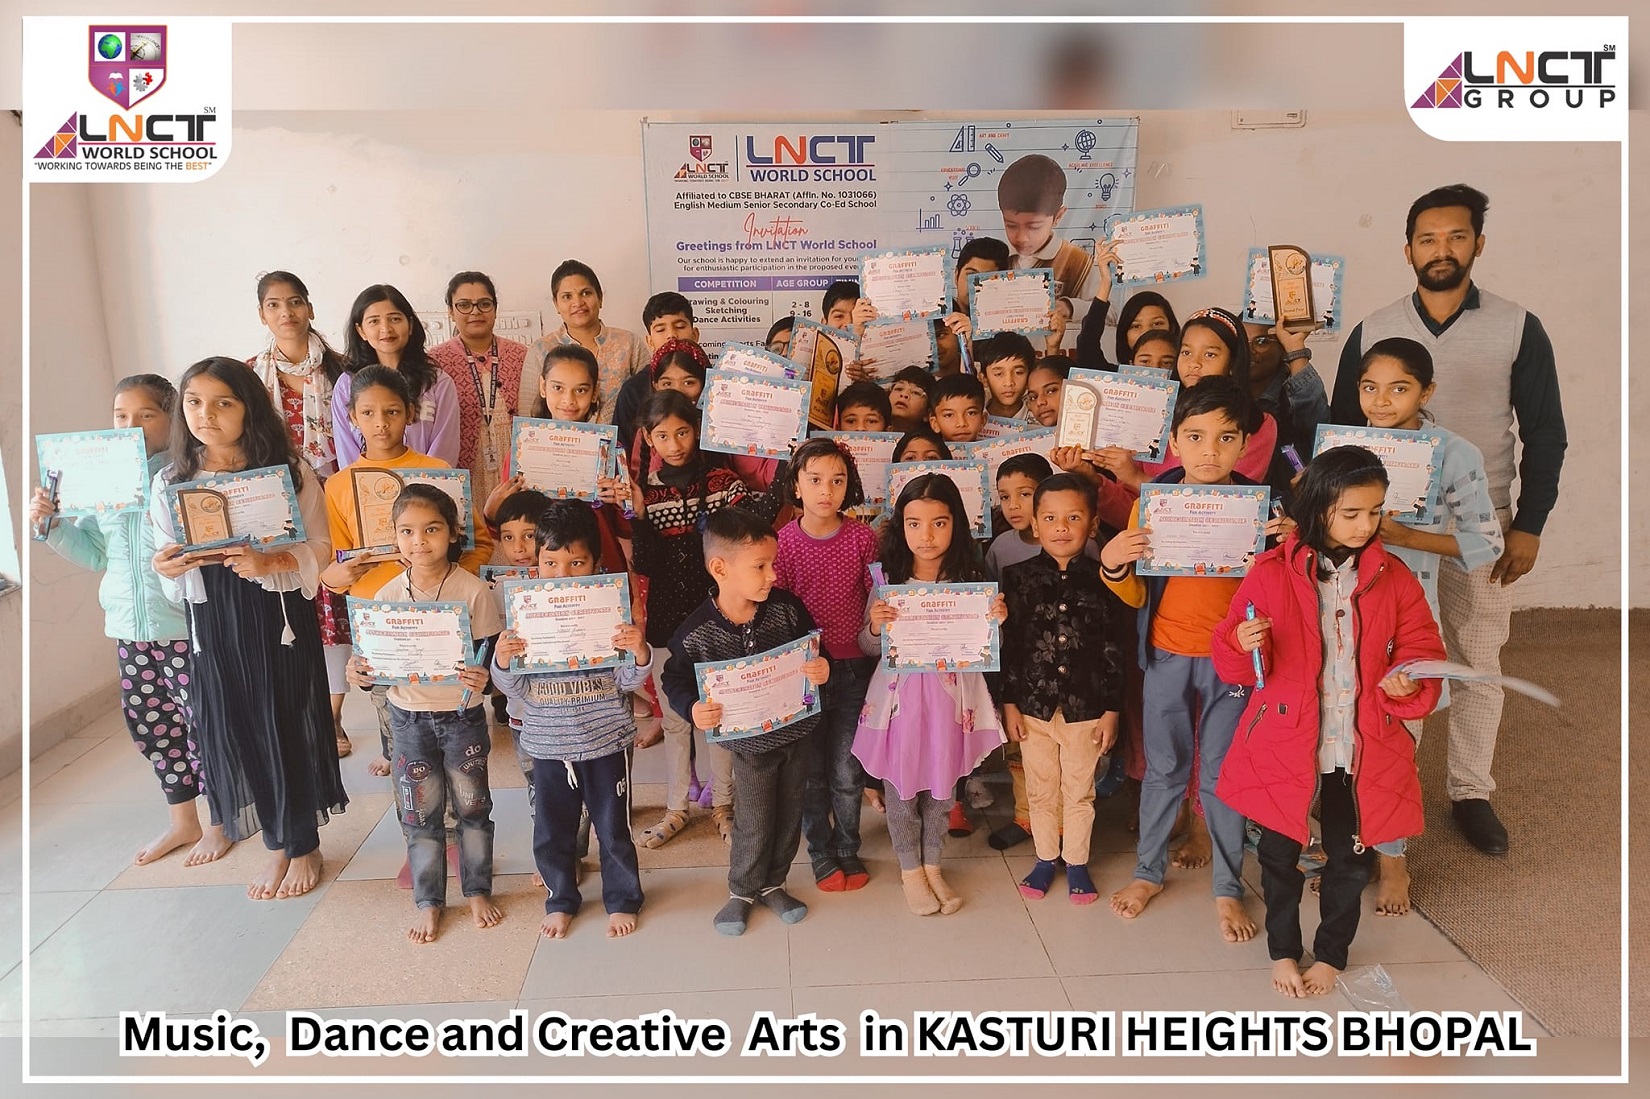 LNCT WORLD SCHOOL BHOPAL organised DRAWING COMPETITION in KASTURI HEIGHTS BHOPAL.